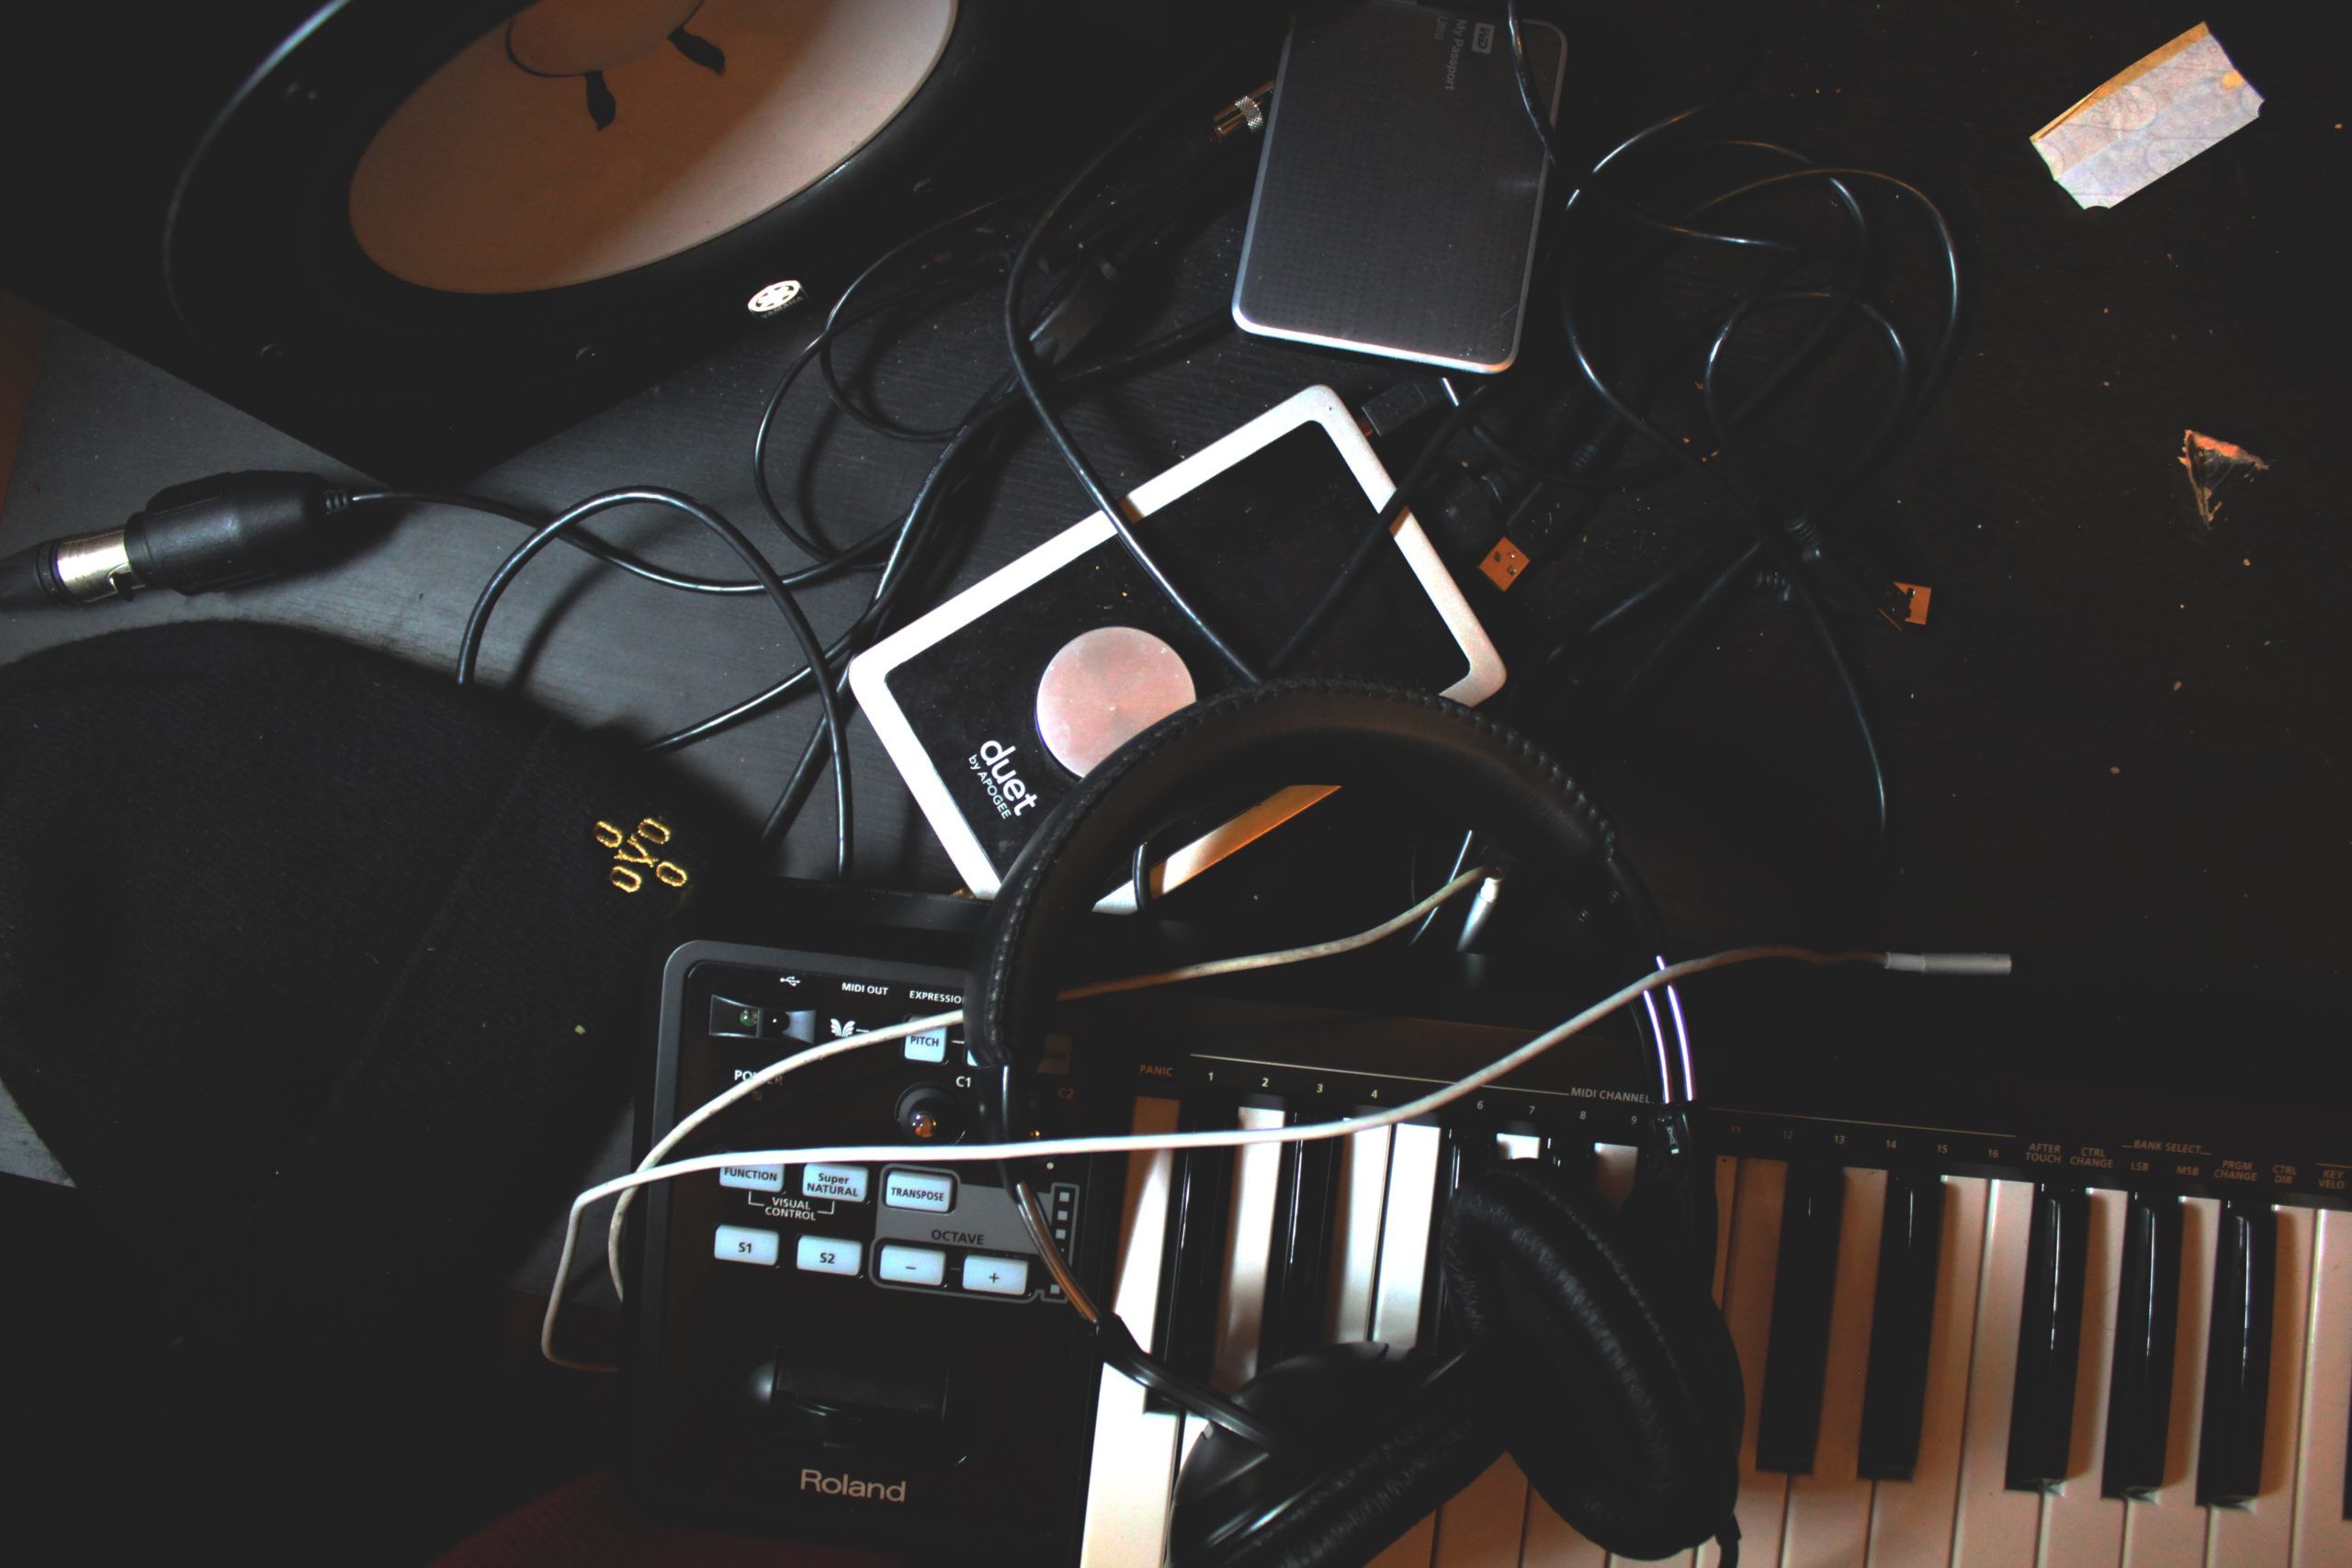 A keyboard, headphones and other electronic devices are on the table - Music, piano